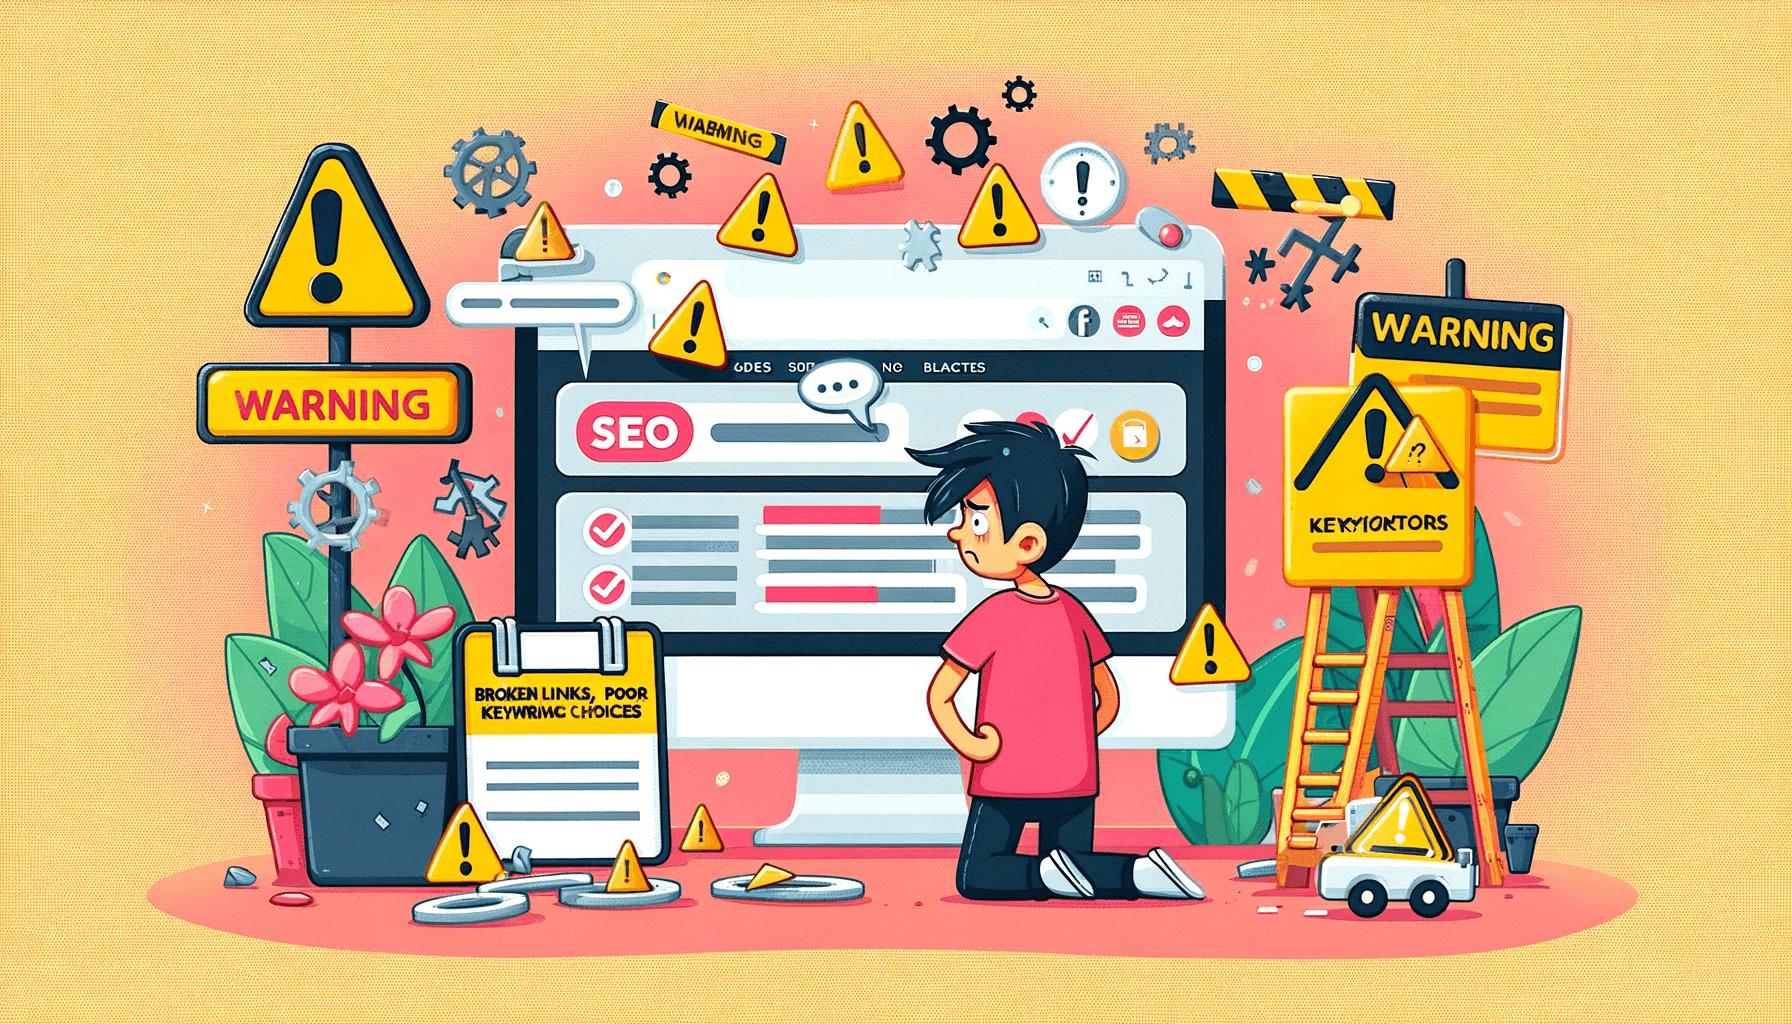 <b>Common Pitfalls in SEO Strategies</b>: The image illustrates common SEO mistakes, with a person looking confused at a web page displaying errors.